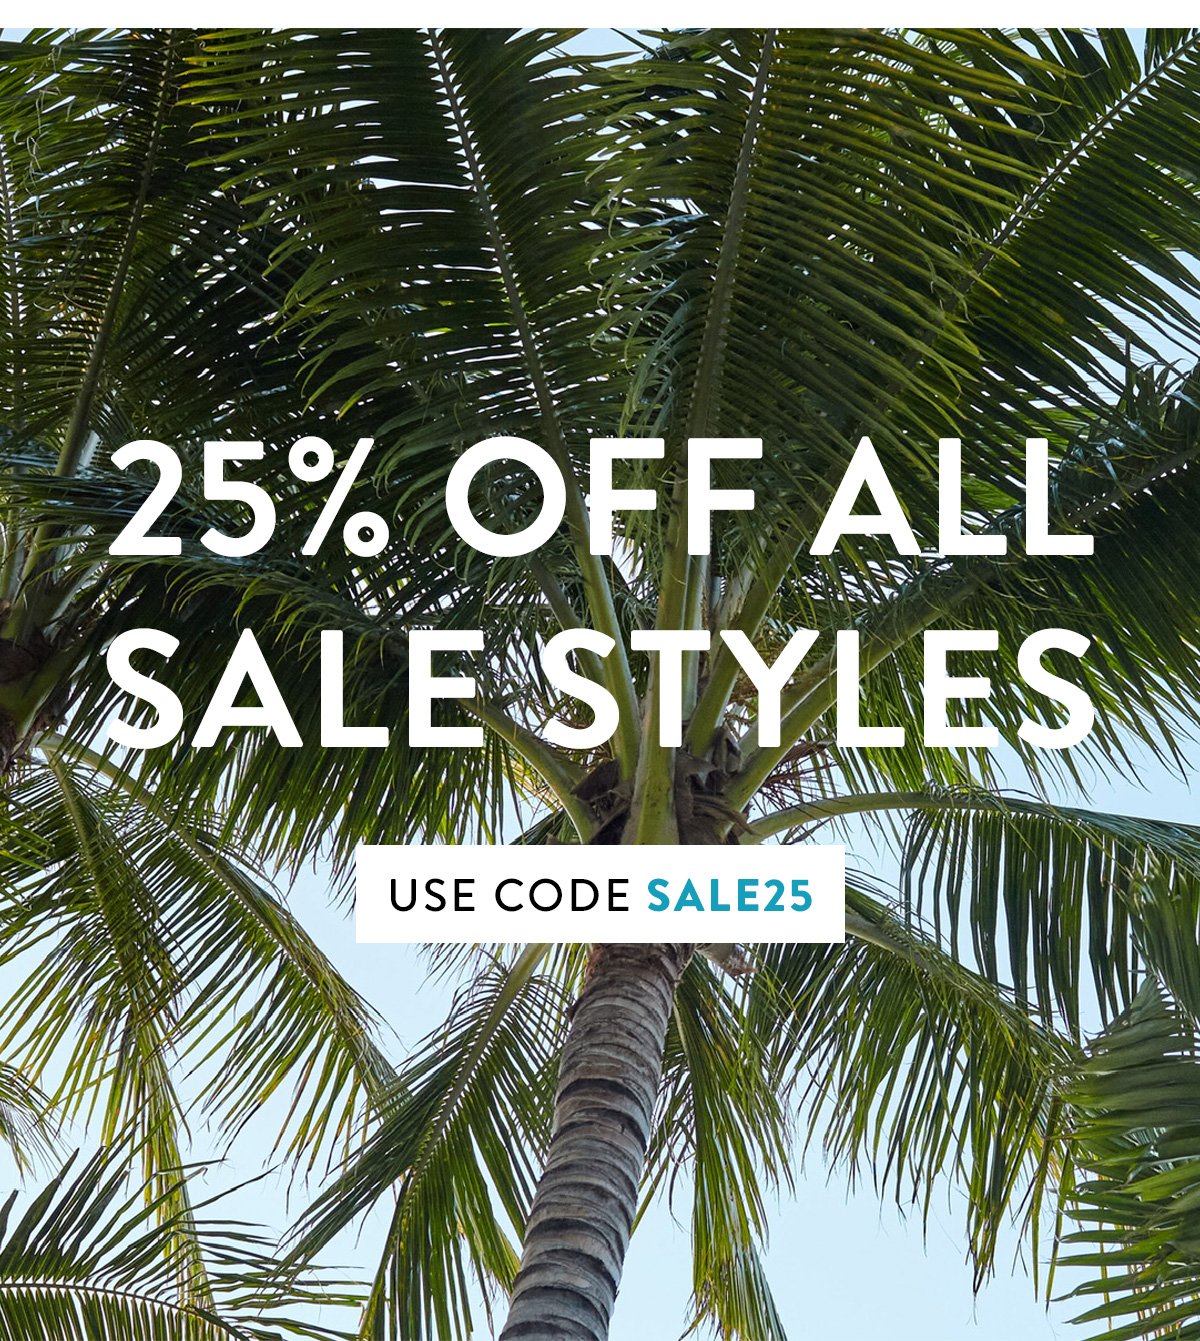 25% OFF ALL SALE STYLES / USE CODE SALE25